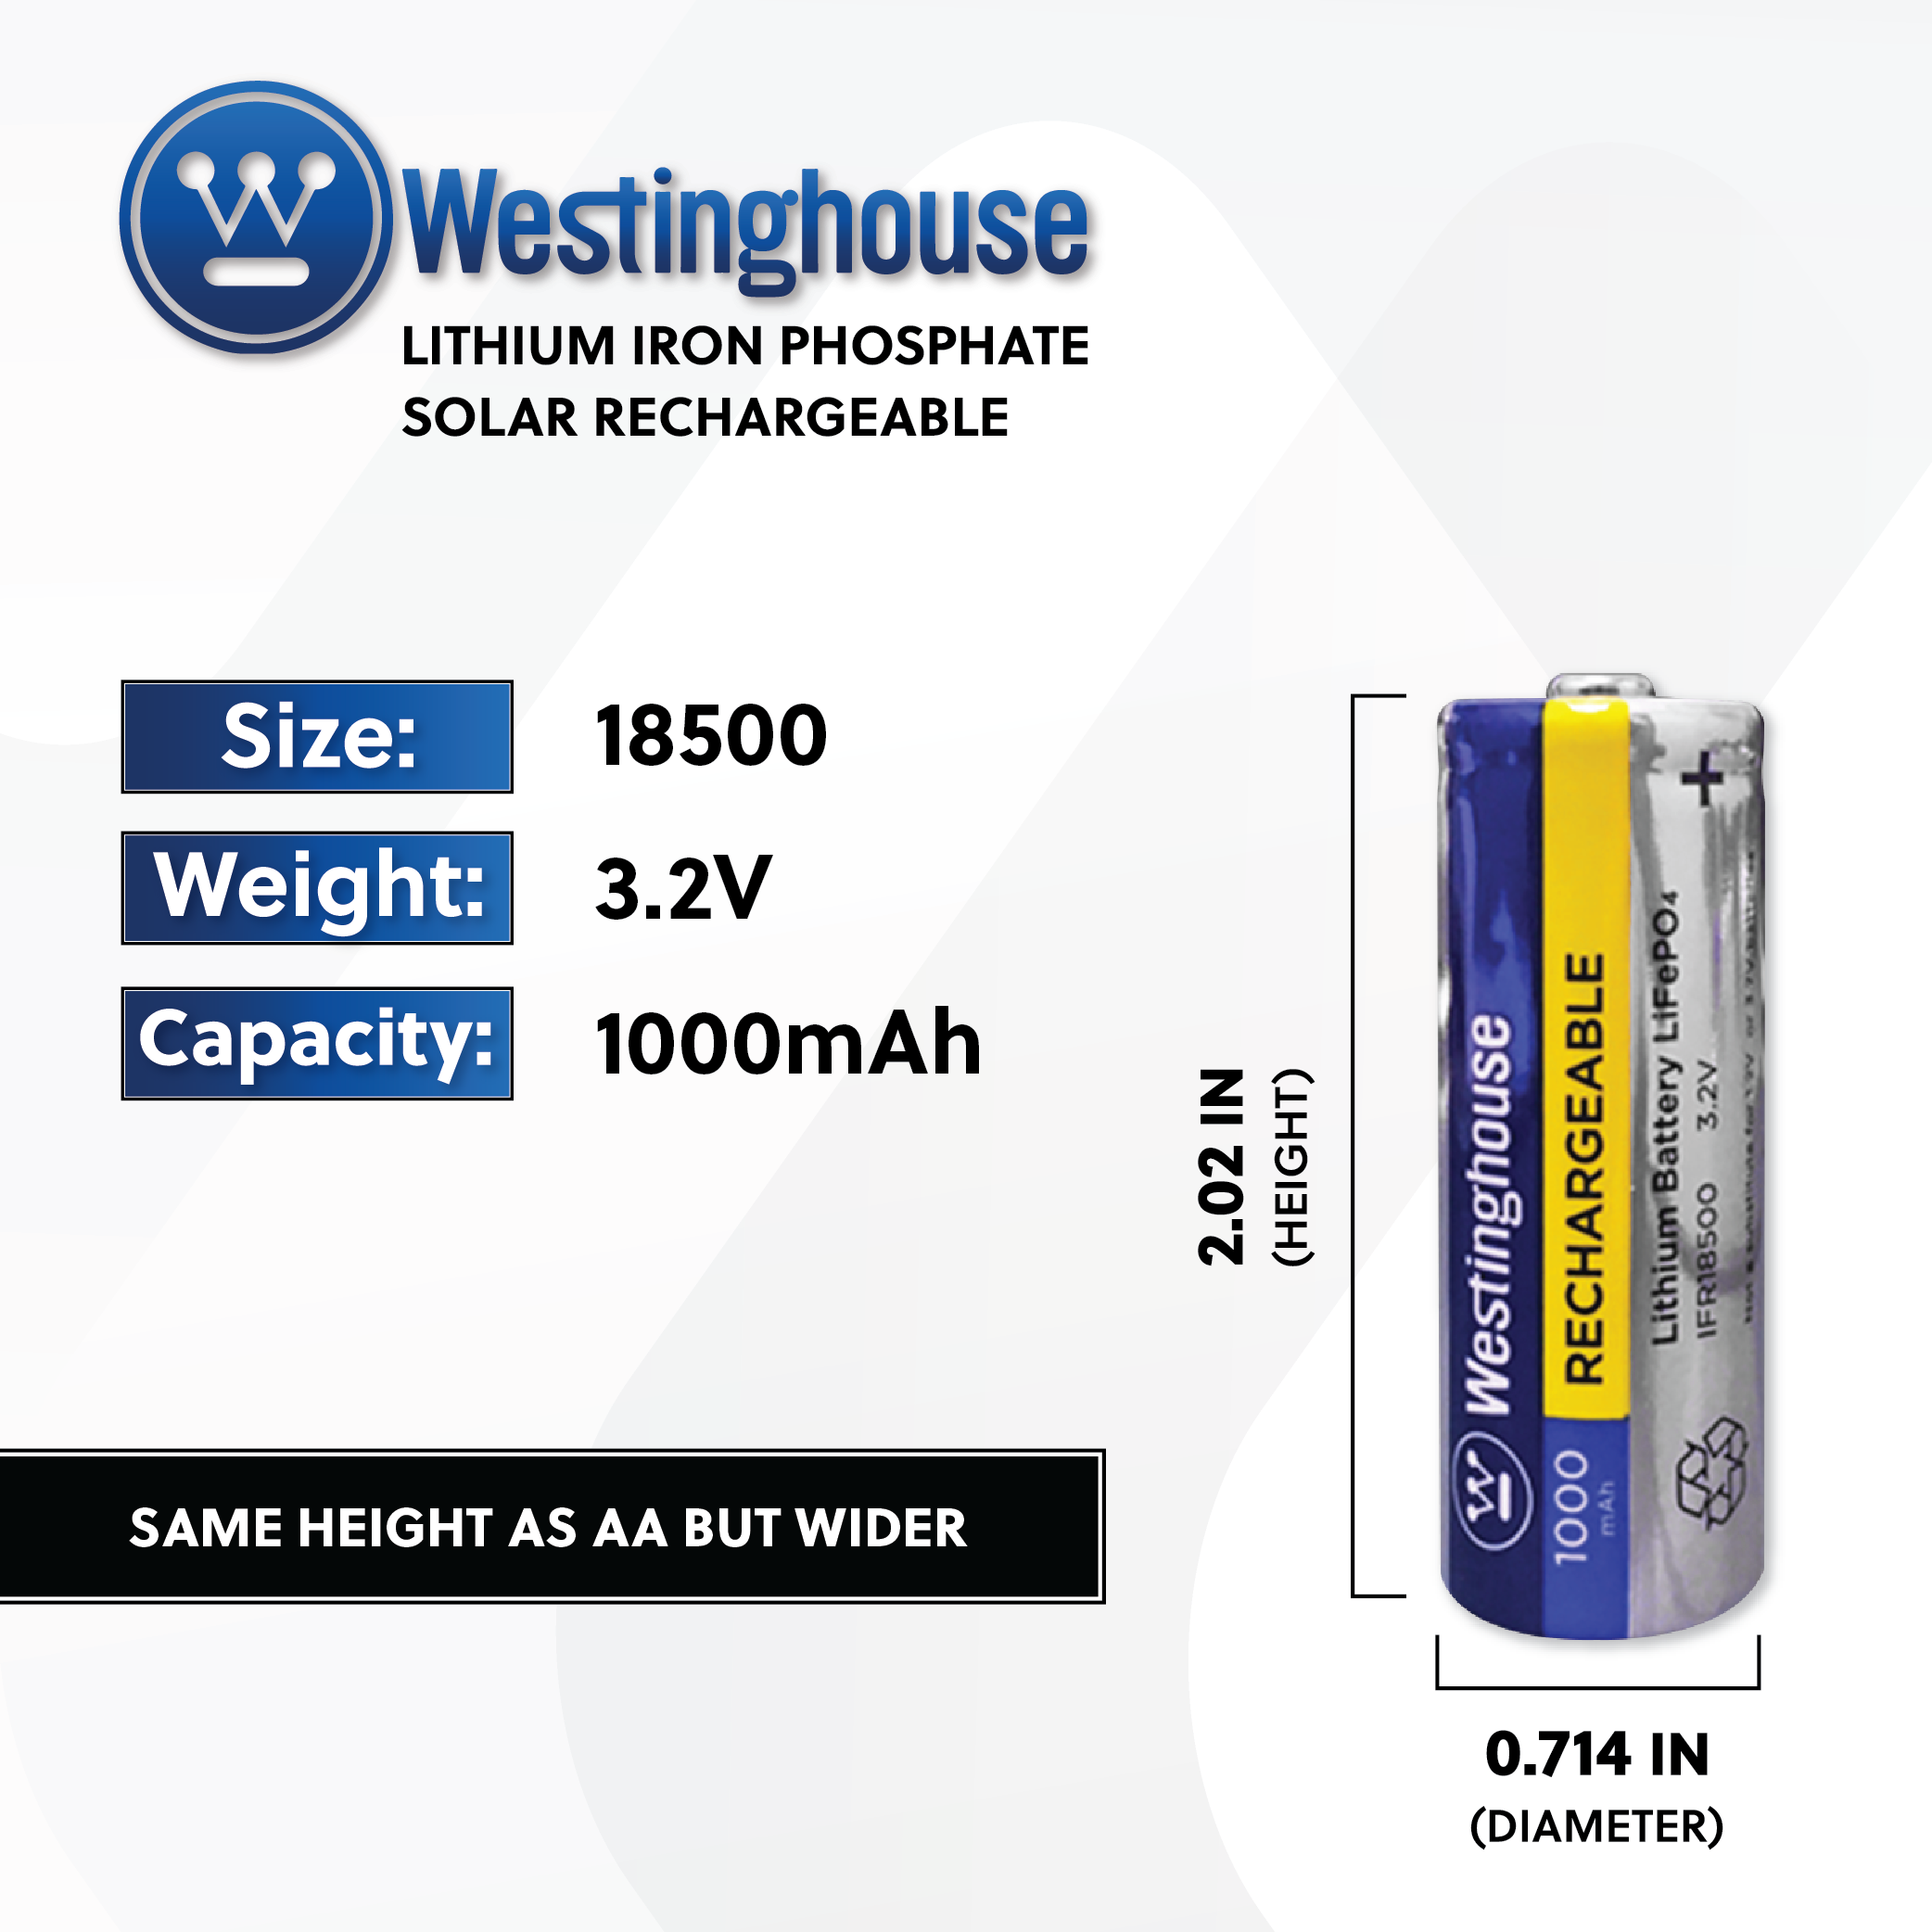 Westinghouse IFR18500 Lithium Iron Phosphate Rechargeable Battery 1000mAh Blister Pack of 4